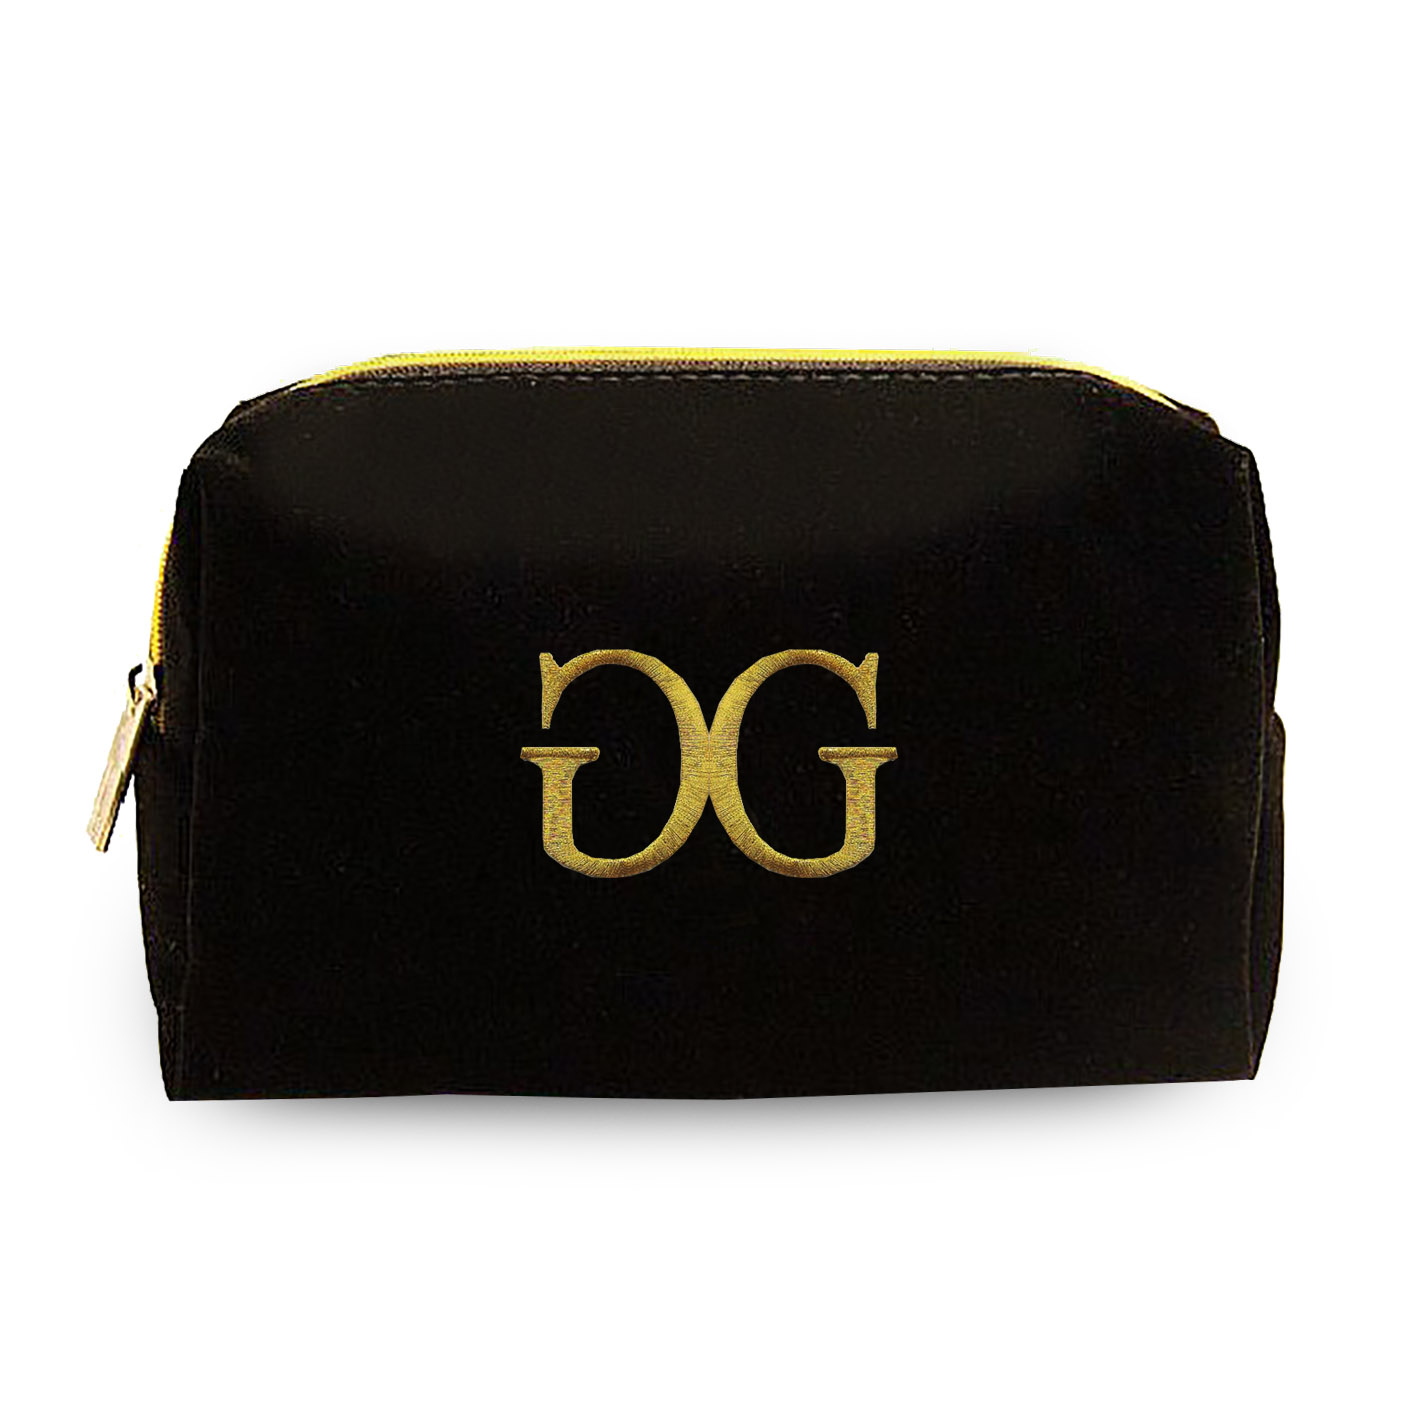 Black Velvet Cosmetic Bag With Metallic Gold Embroidery